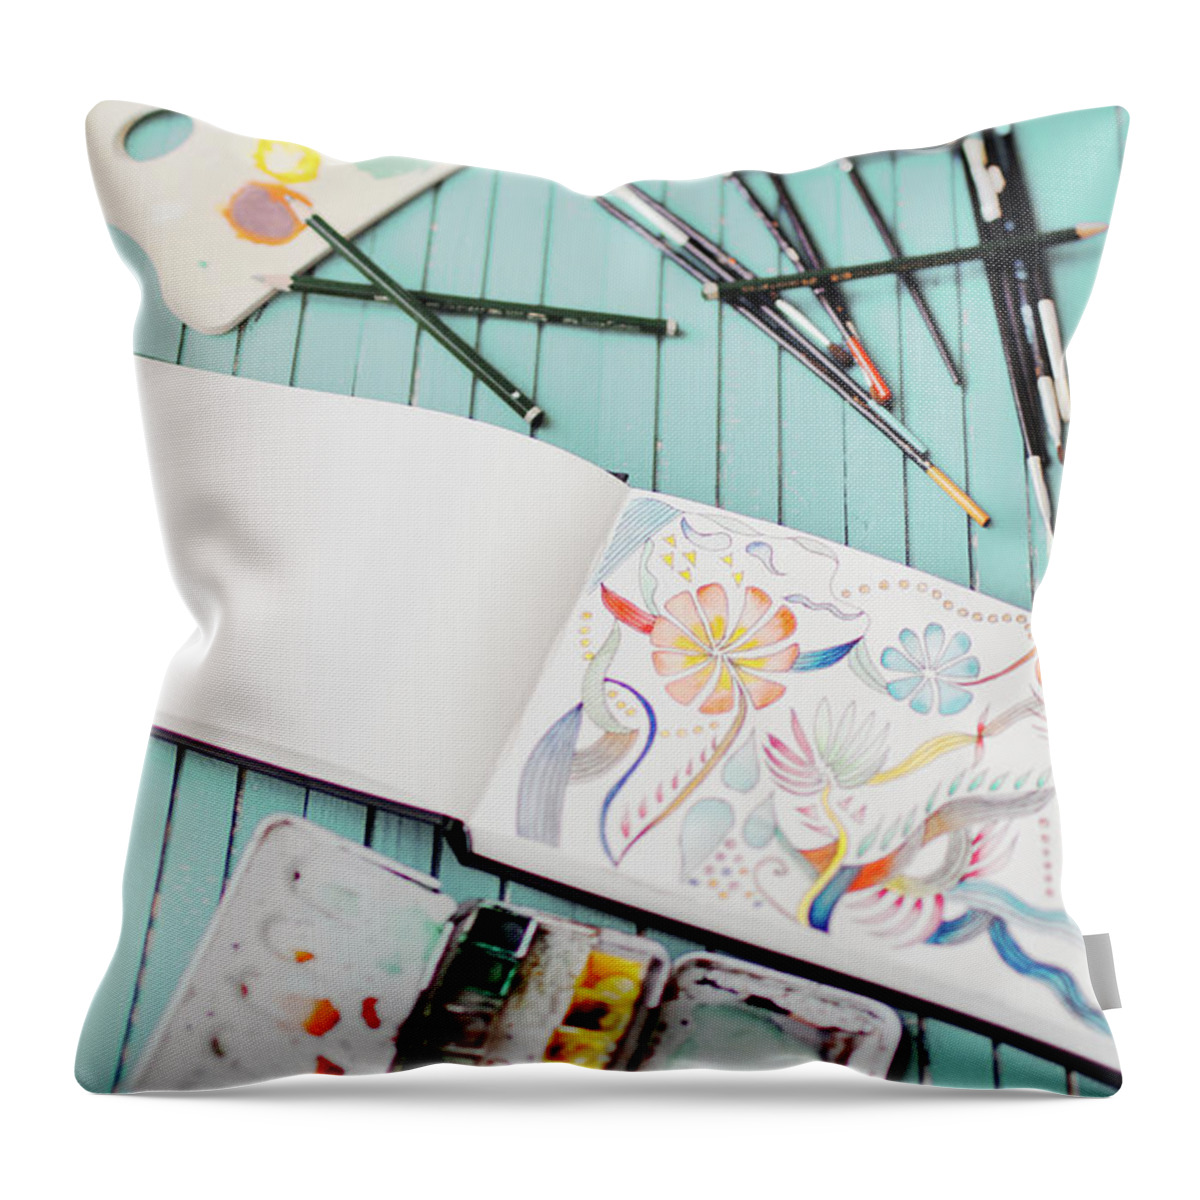 Art Throw Pillow featuring the photograph Watercolor by Julia Davila-lampe